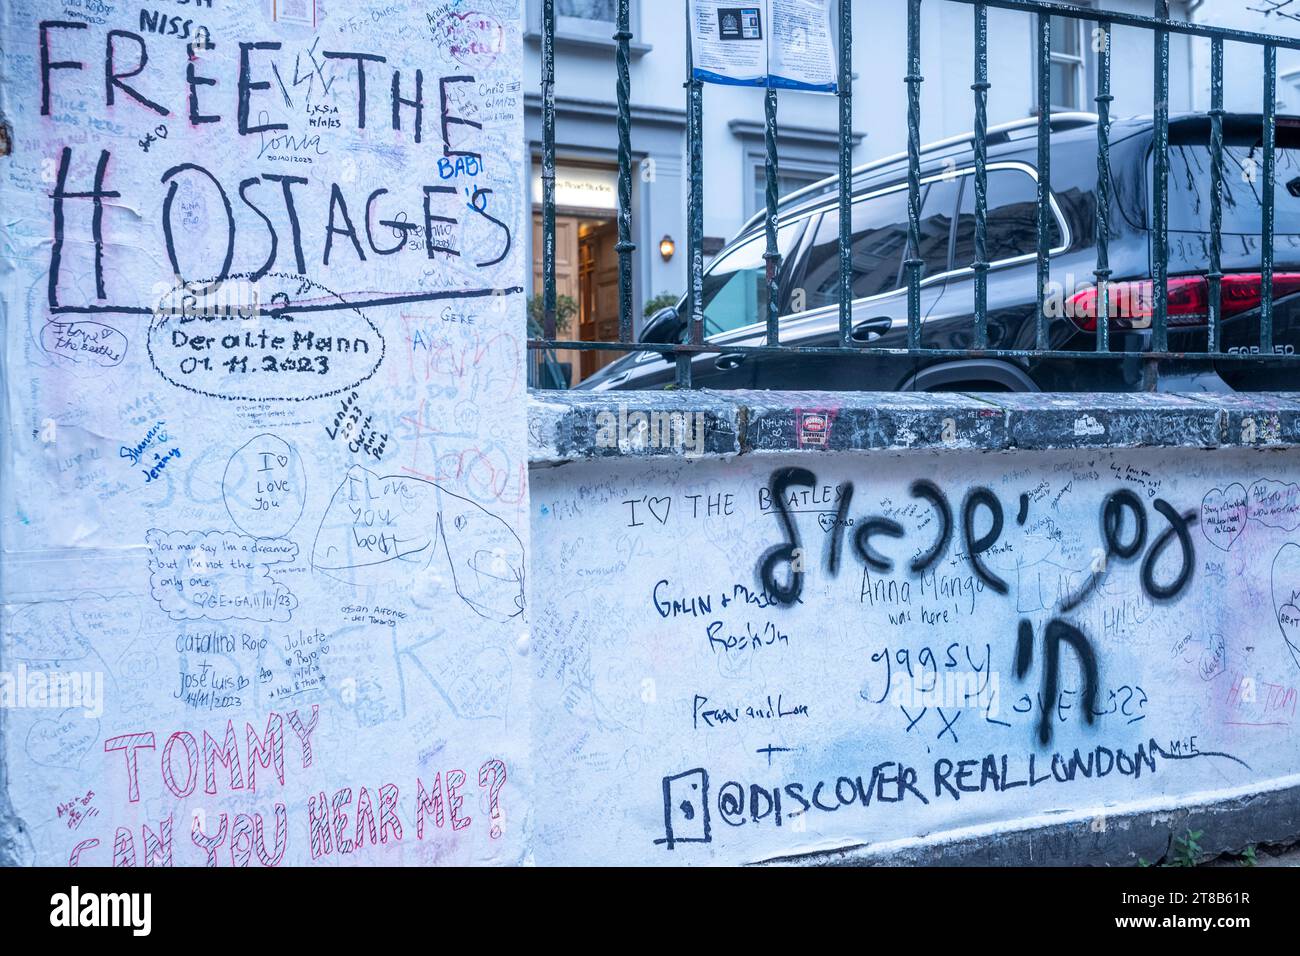 London, Abbey Road StudiosUK 19th November. On the boundary walls of the famous Abbey Road Studios, pro Israel supporters have written in Hebrew, “Am Yisrael Chi”,  “The people of Israel live” , a Jewish solidarity anthem. And ‘Free the Hostages’ now. Credit: Rena Pearl/Alamy Live News Credit: Rena Pearl/Alamy Live News Stock Photo